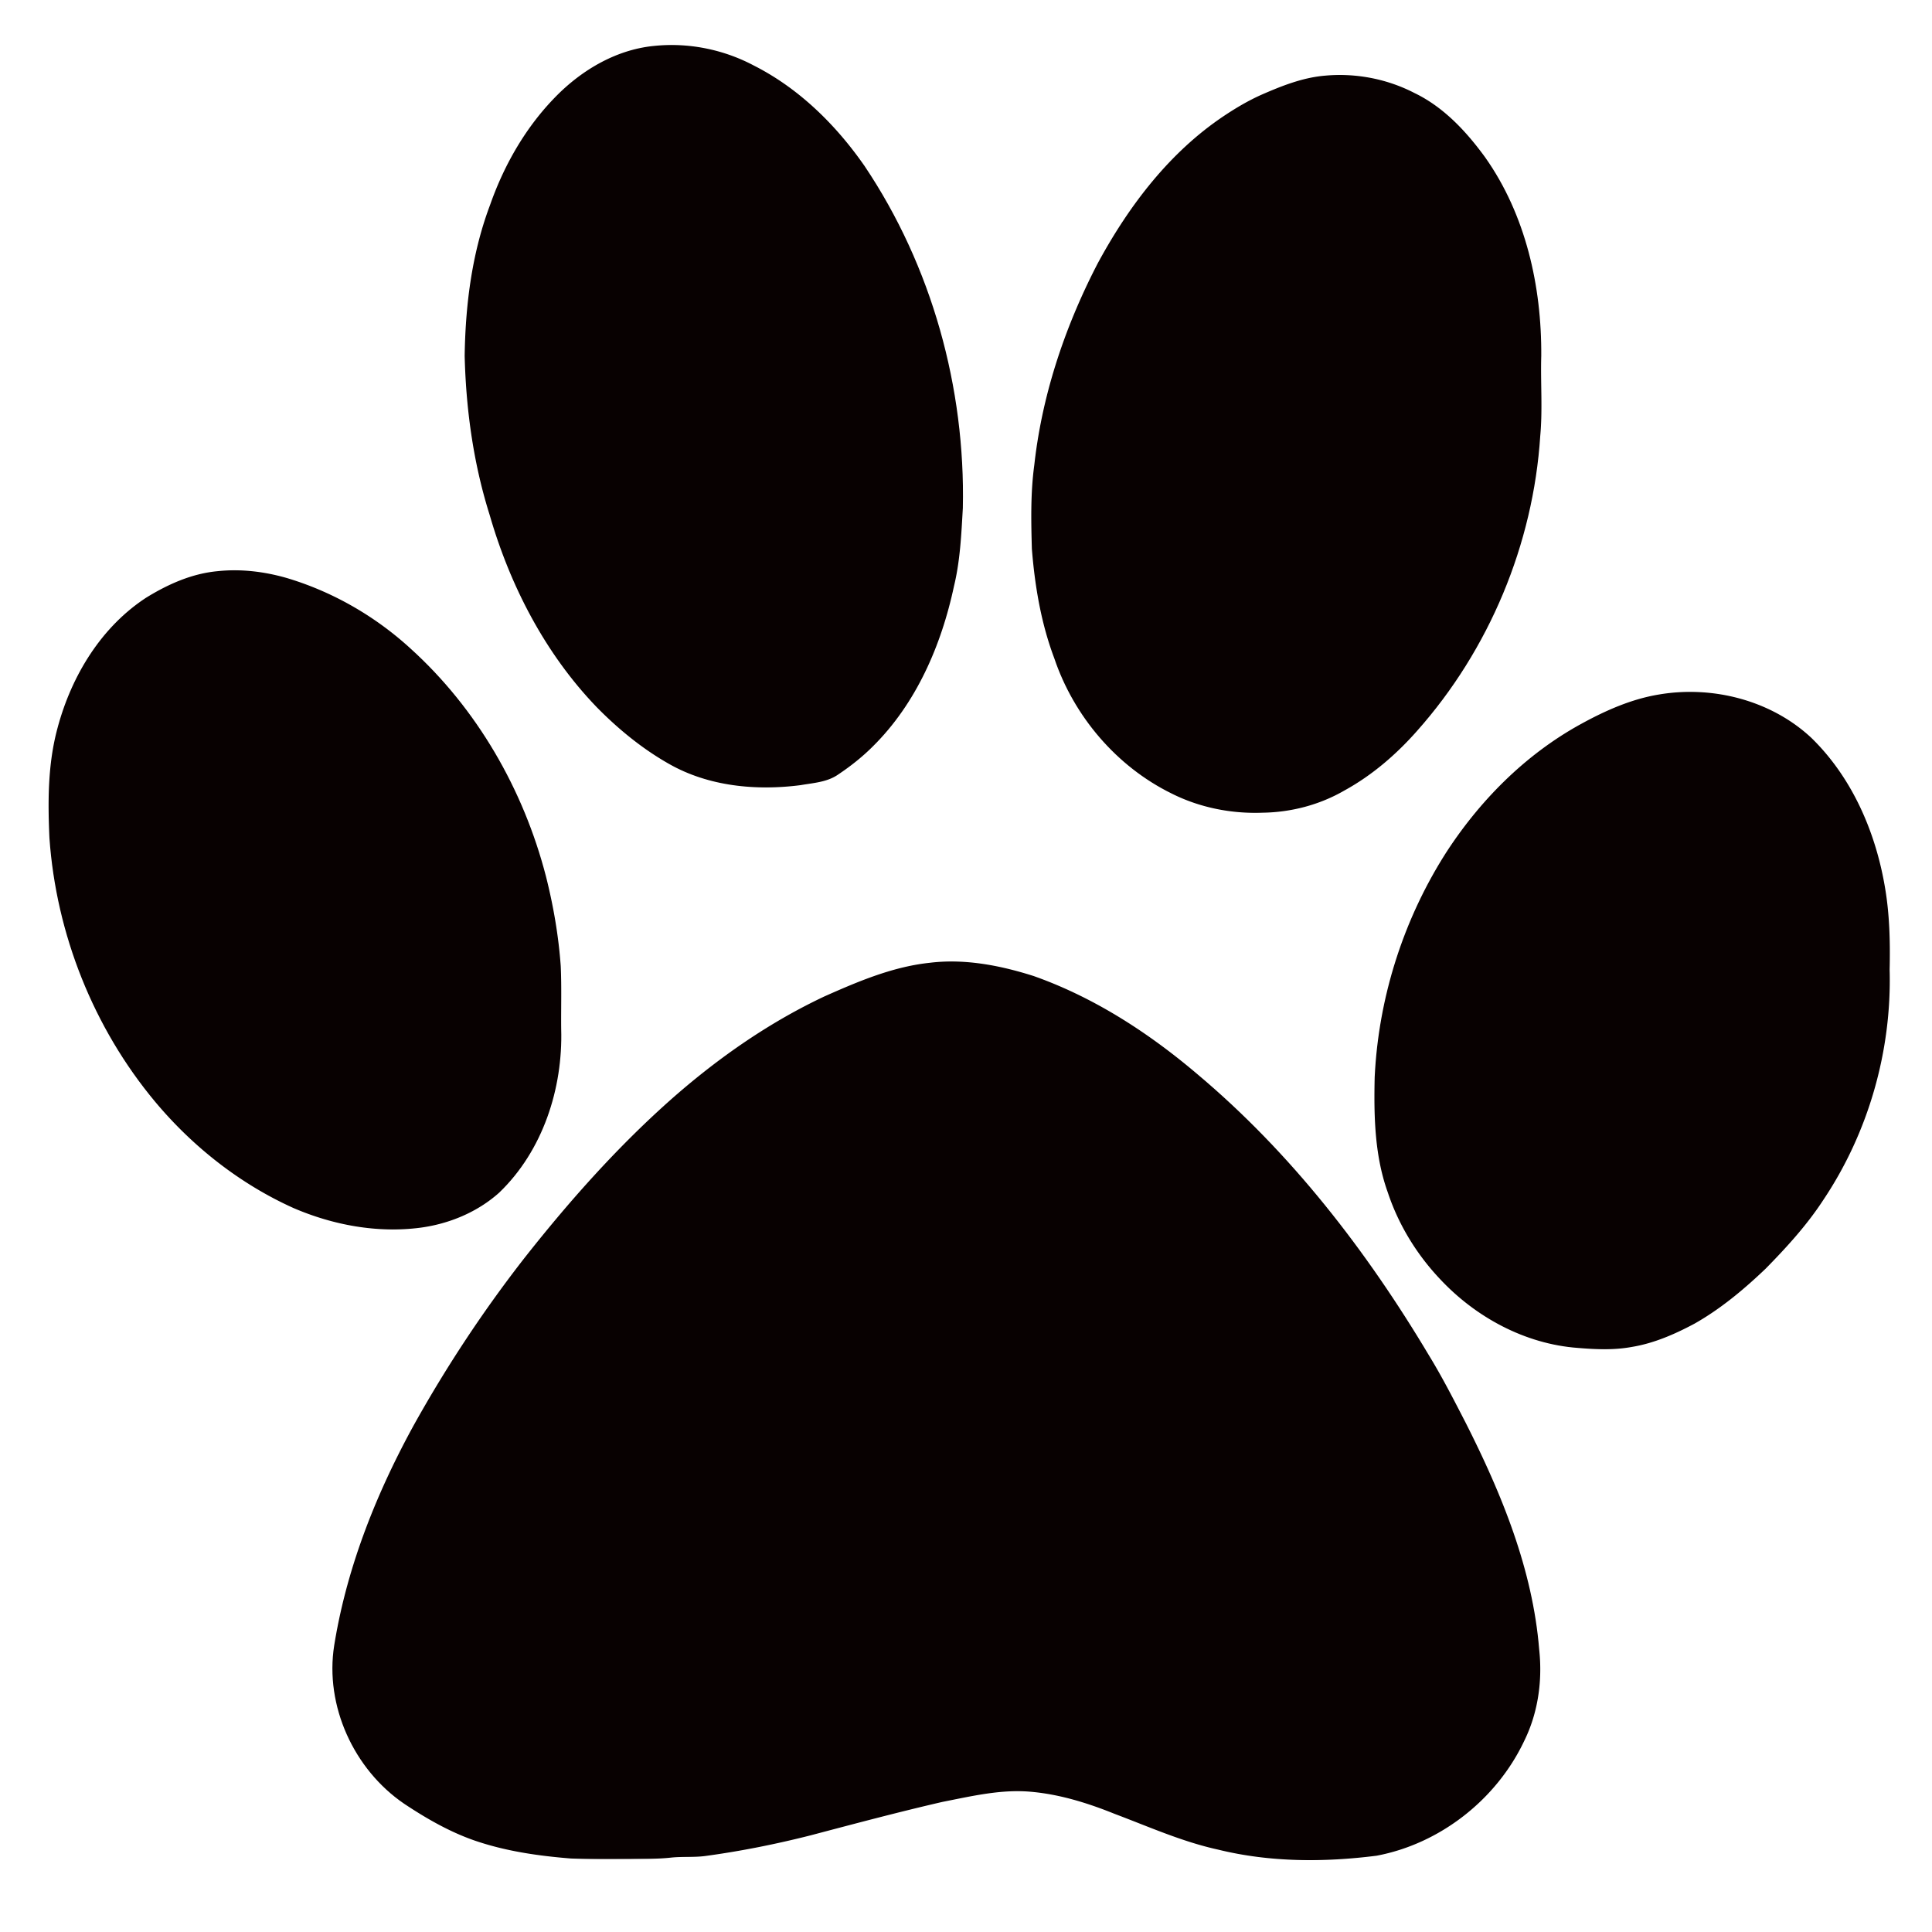 Panther paw print clip art clipart 2